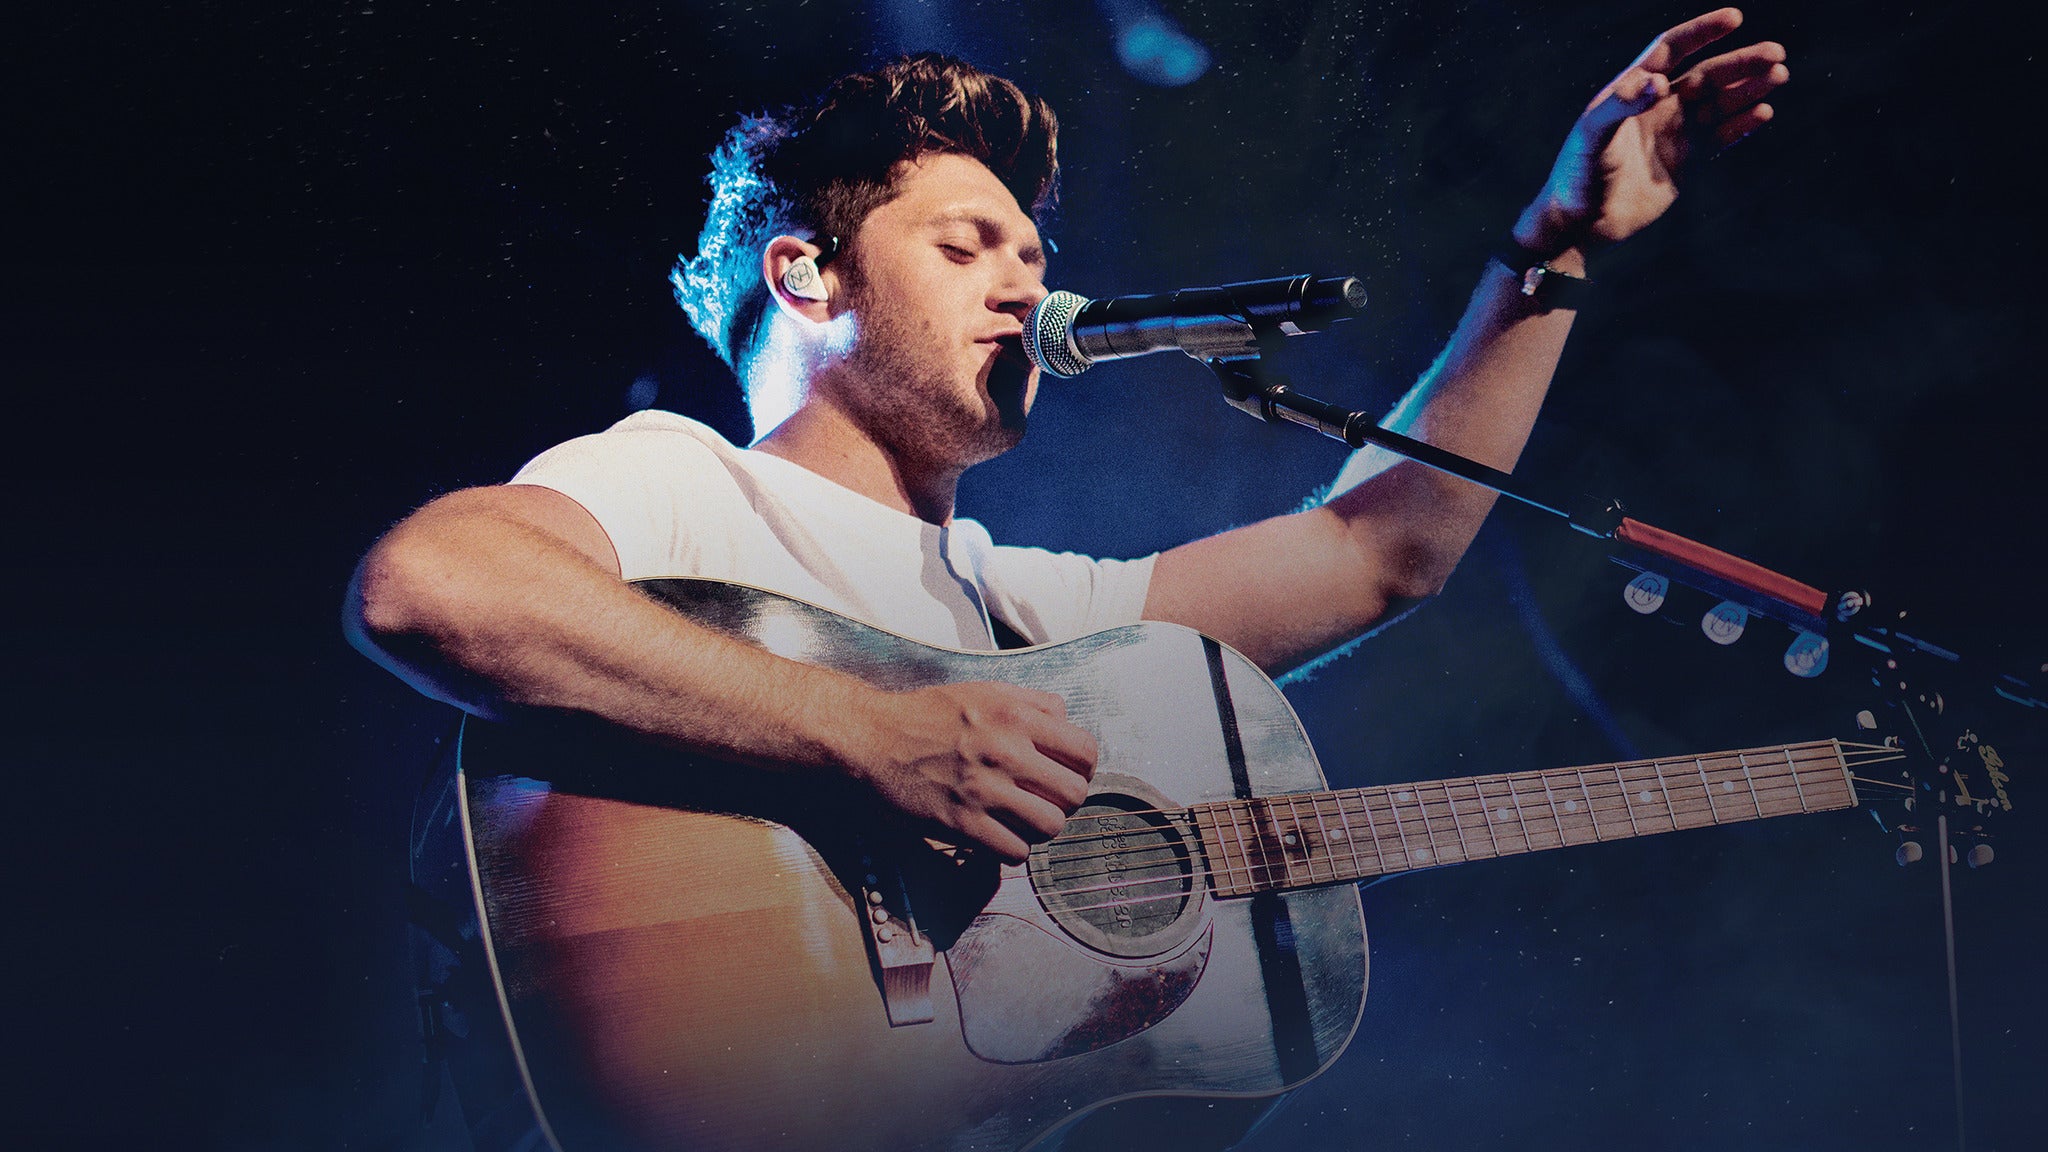 Honda Civic Tour presents Niall Horan, Nice To Meet Ya in Indianapolis promo photo for Live Nation Mobile App presale offer code